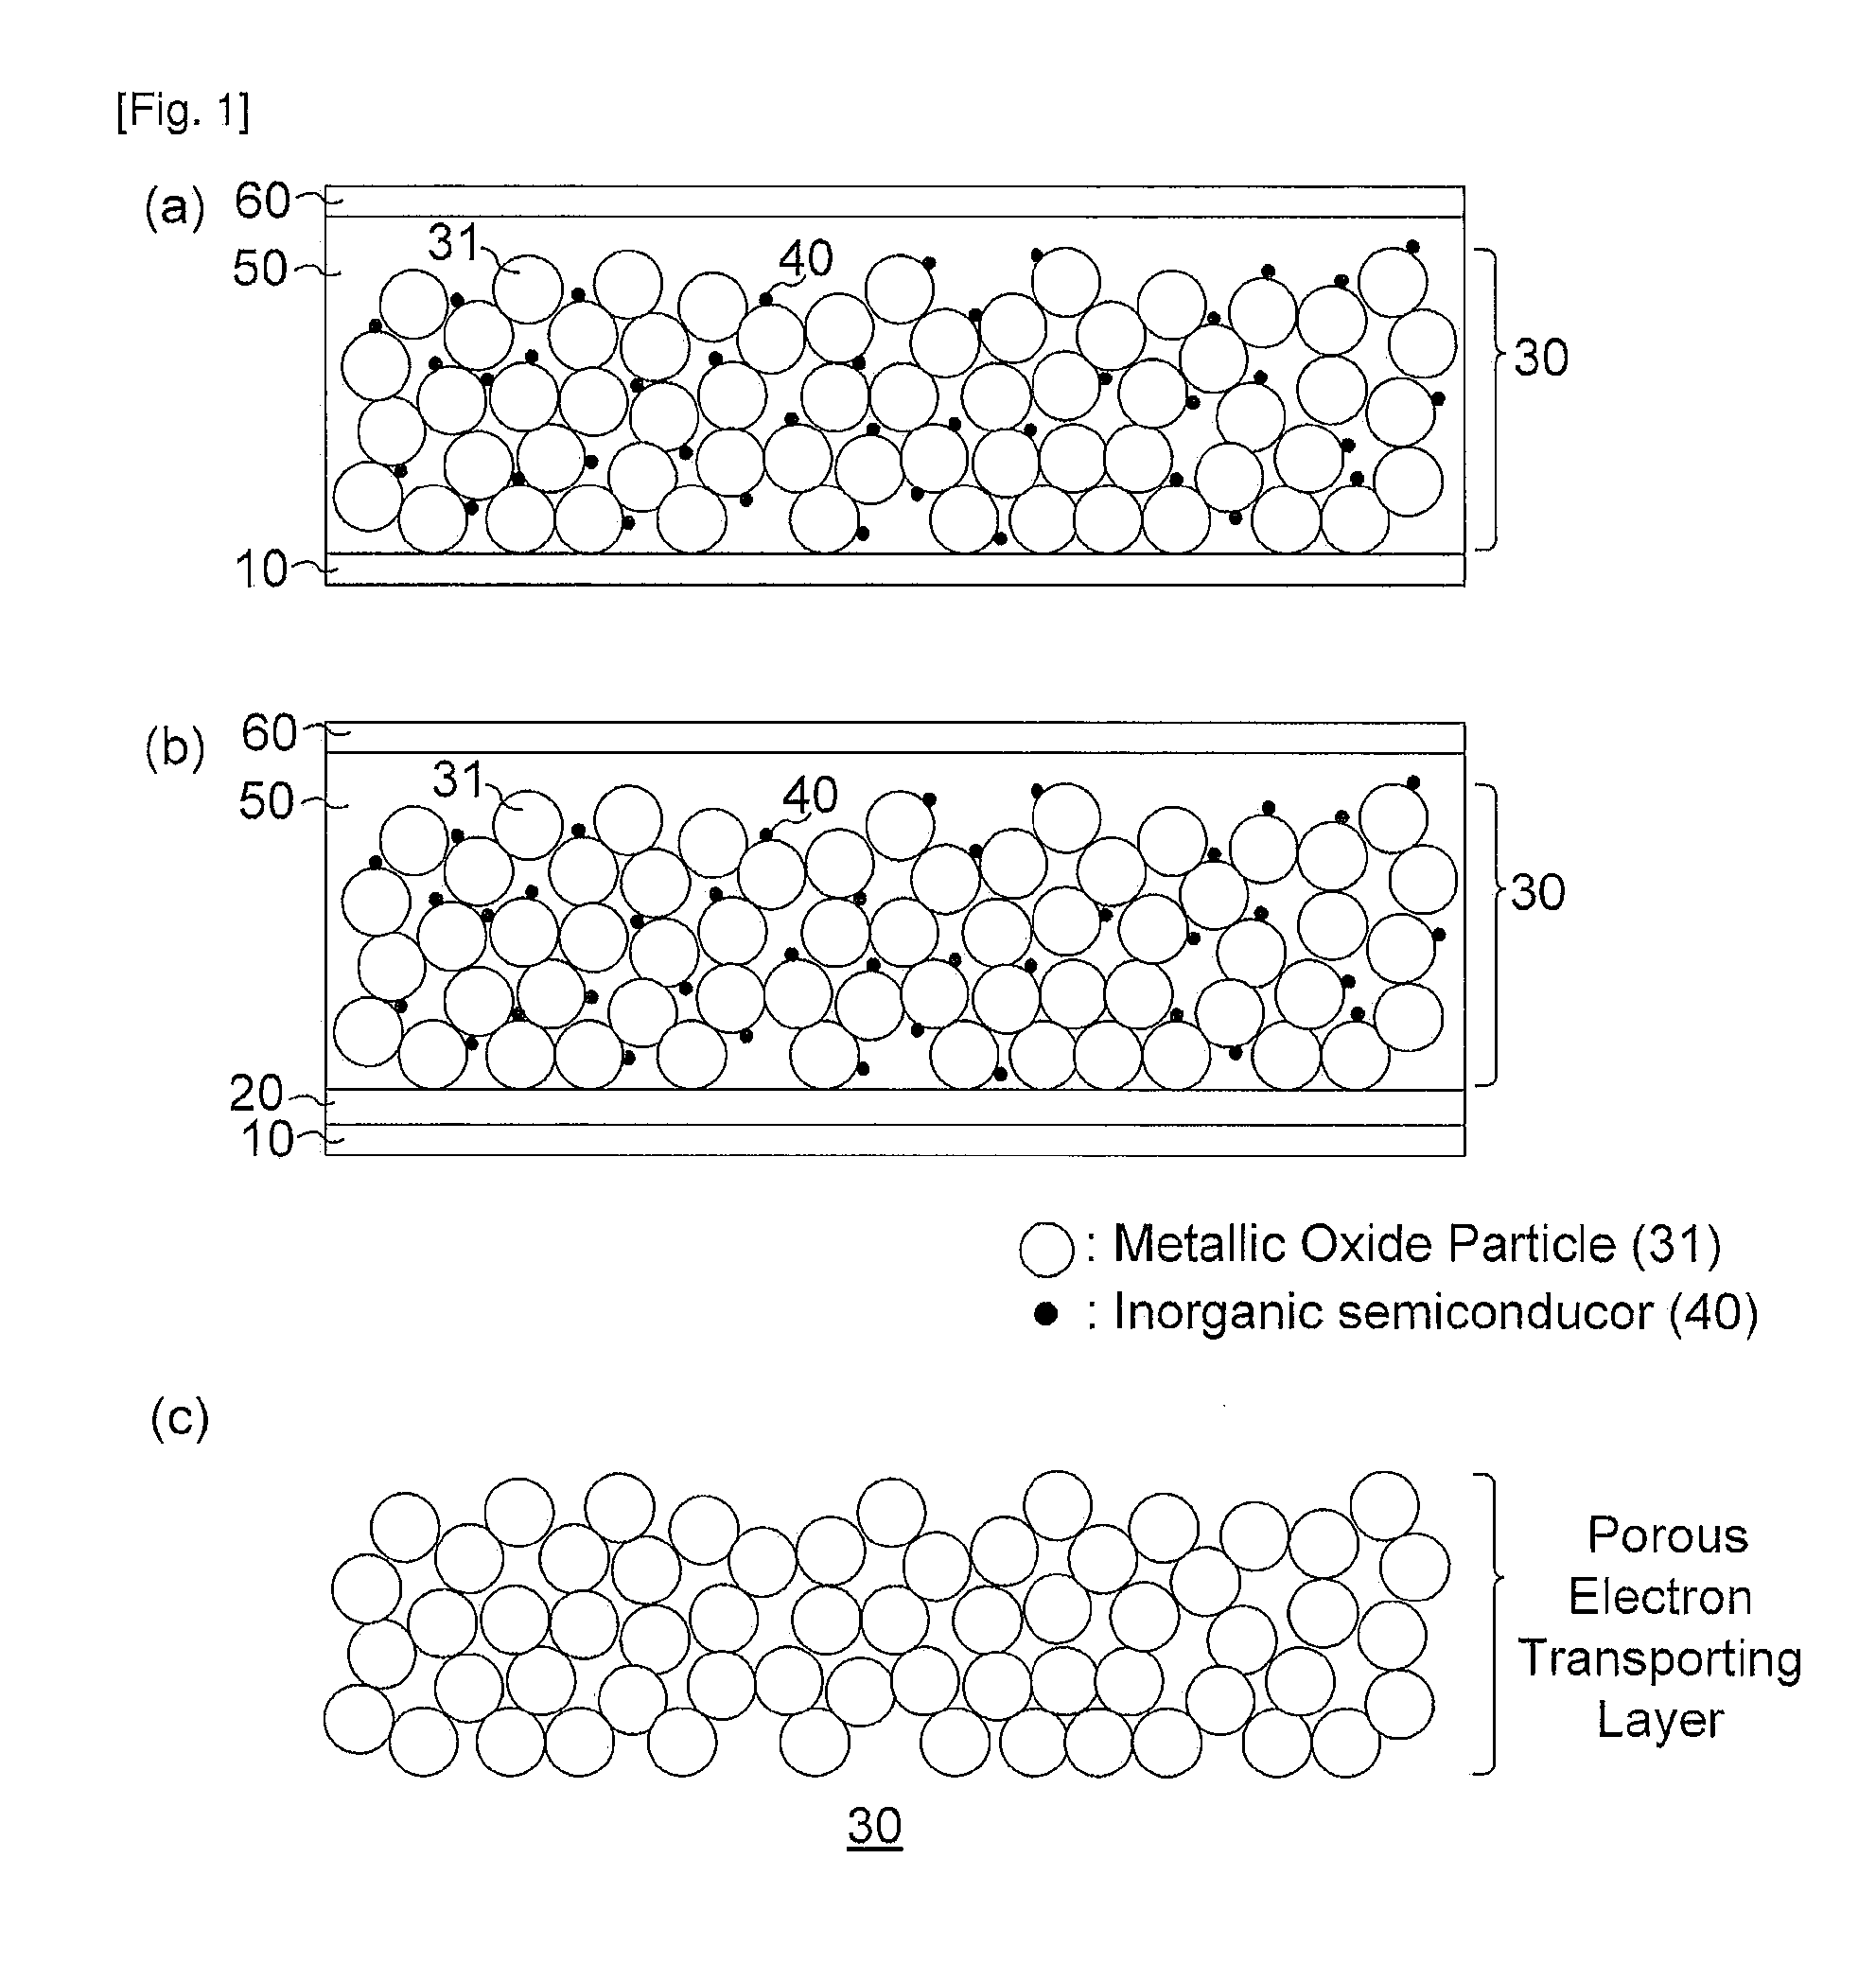 Method for Manufacturing a Nanostructured Inorganic/Organic Heterojunction Solar Cell